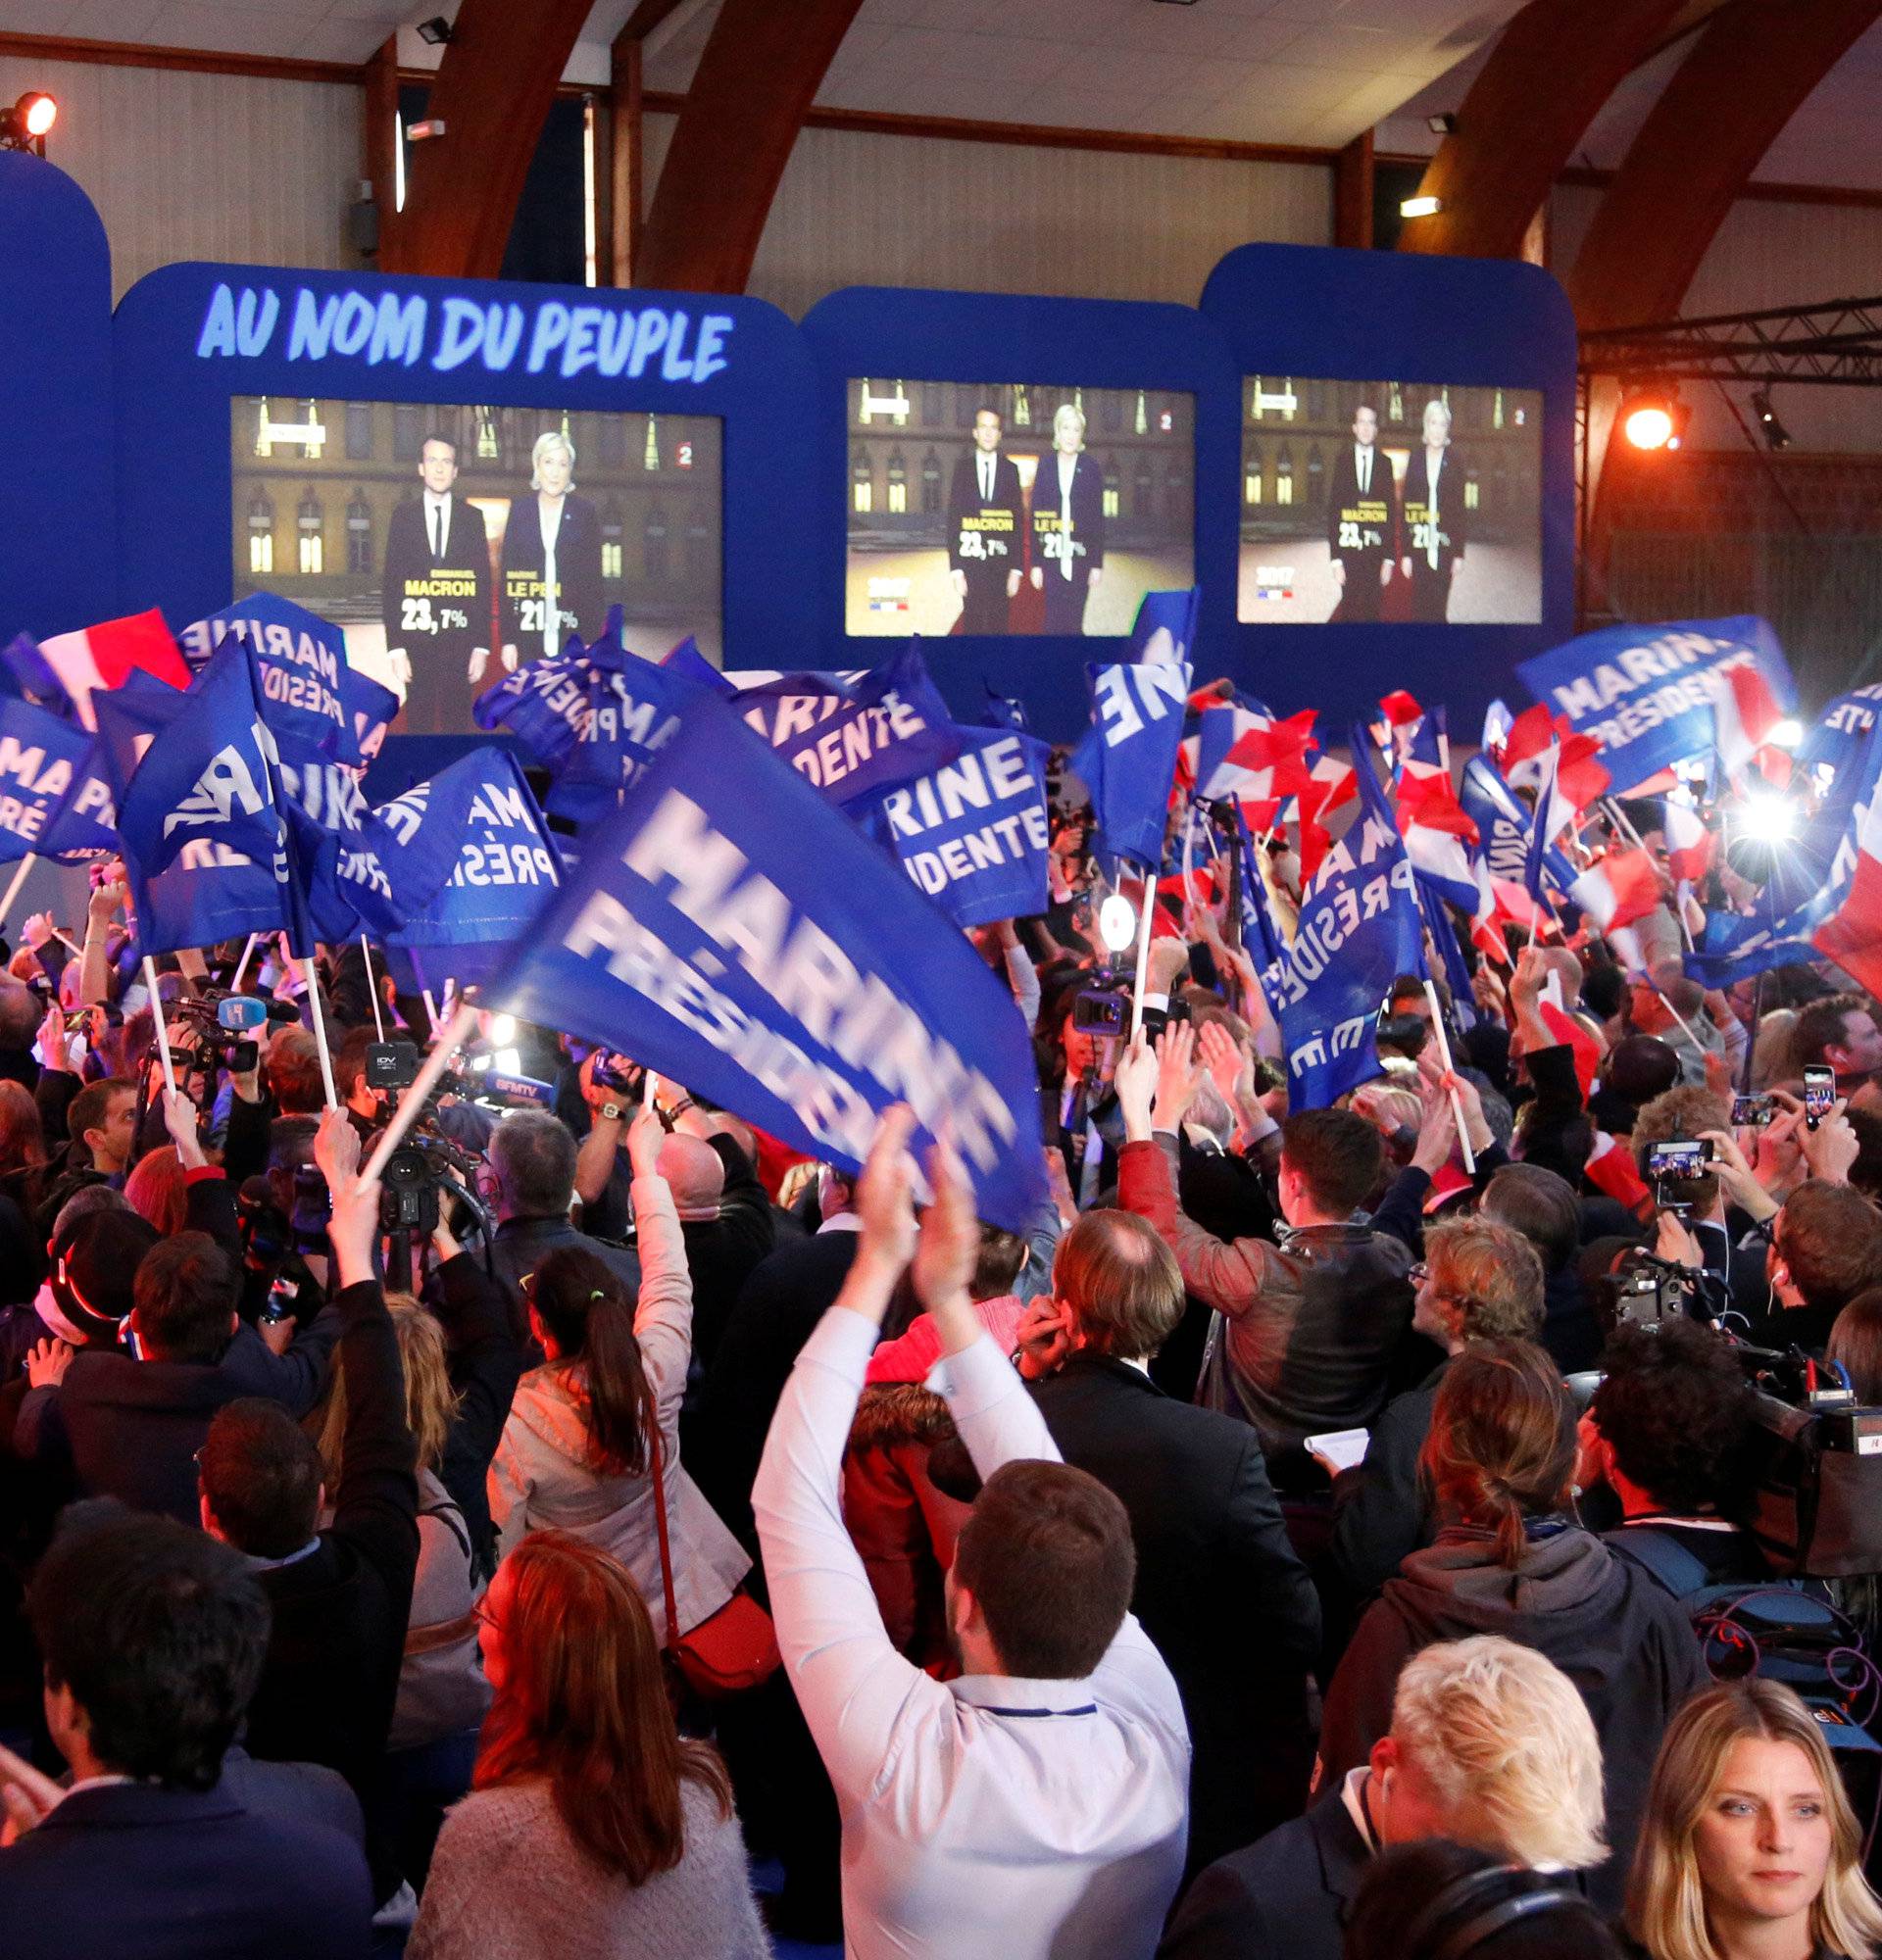 Supporters of Marine Le Pen, French National Front (FN) political party leader and candidate for French 2017 presidential election, react in Henin-Beaumont